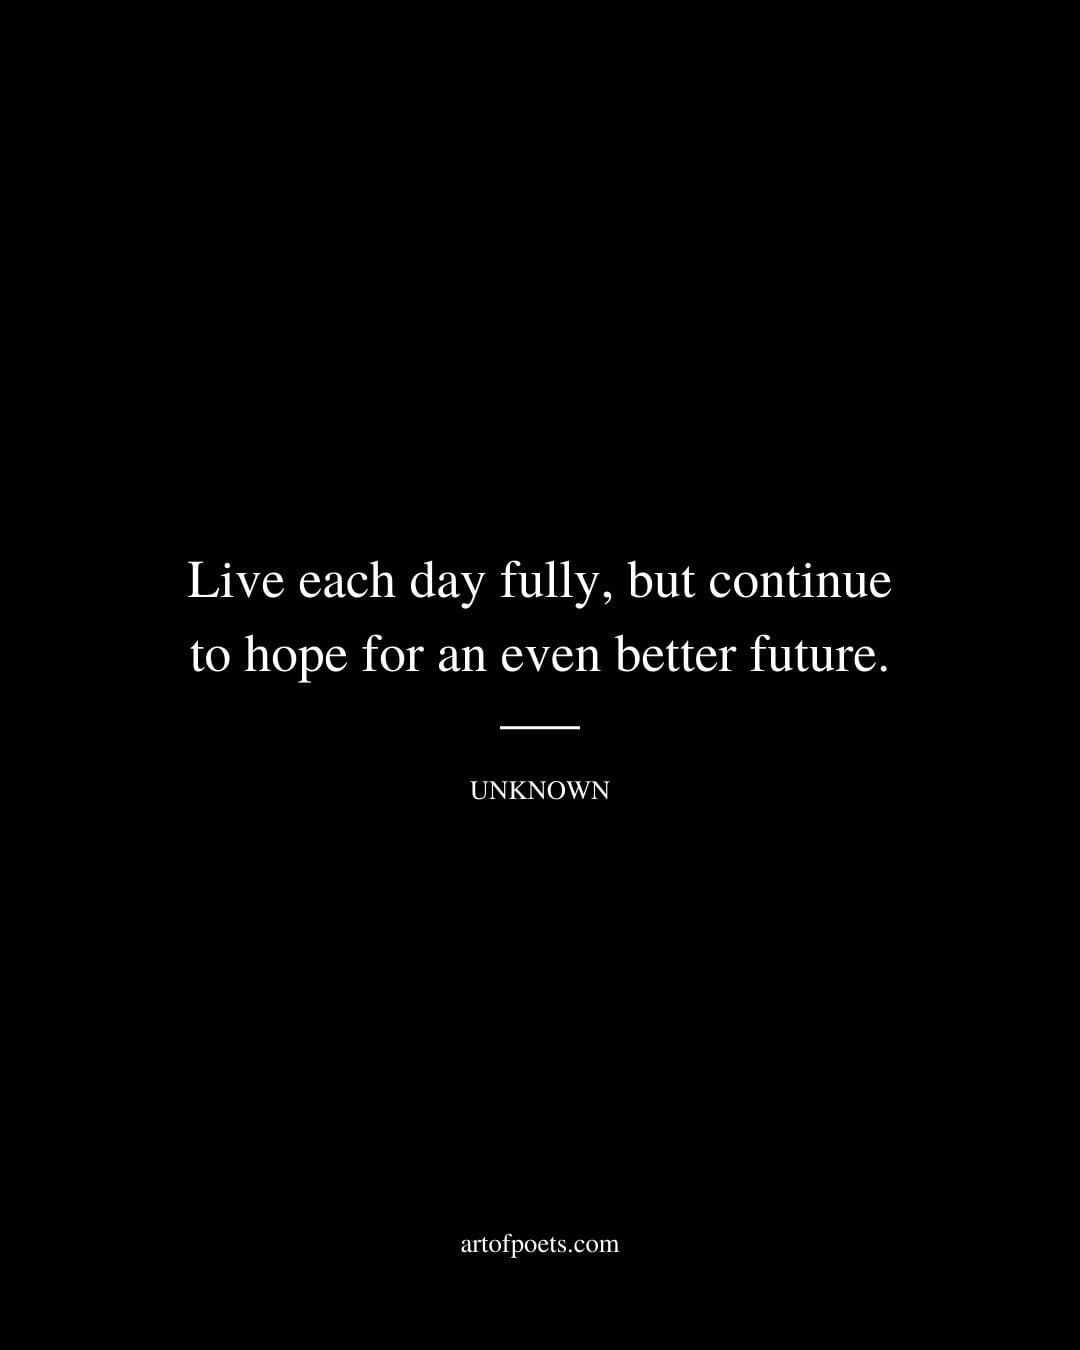 Live each day fully but continue to hope for an even better future